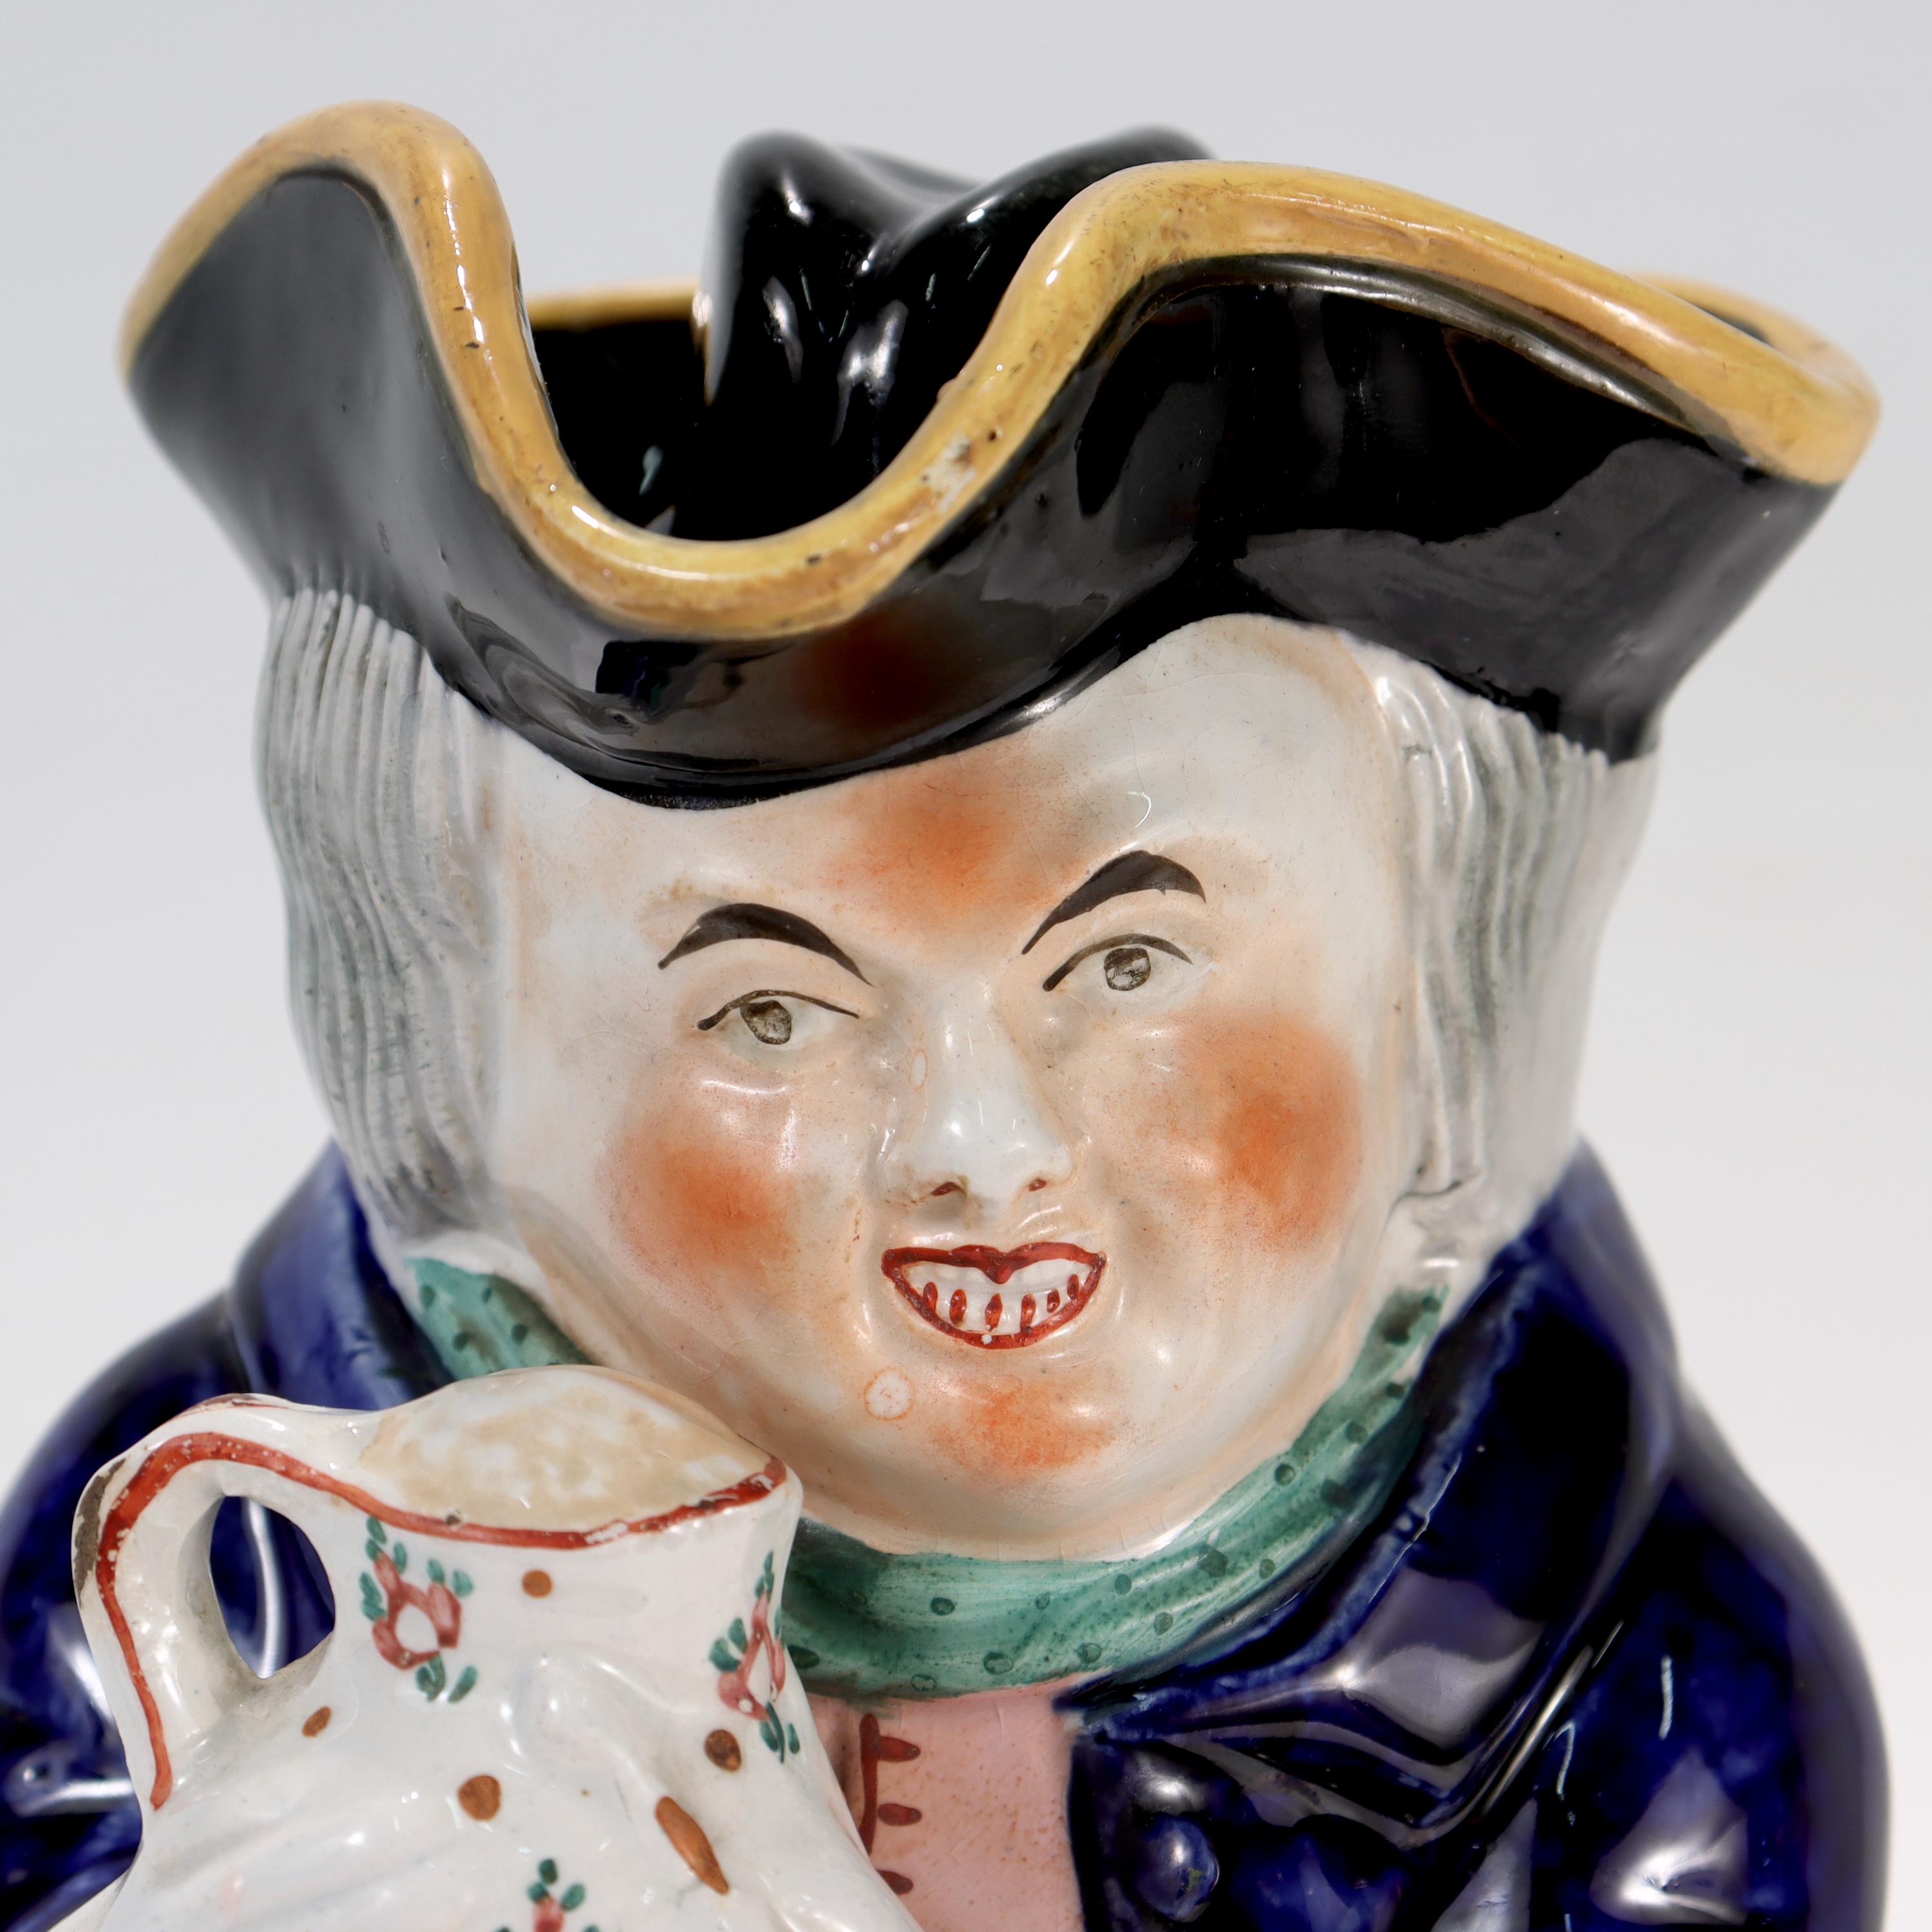 Antique English Staffordshire Pottery Toby Jug with Tricorn Hat Lid For Sale 2